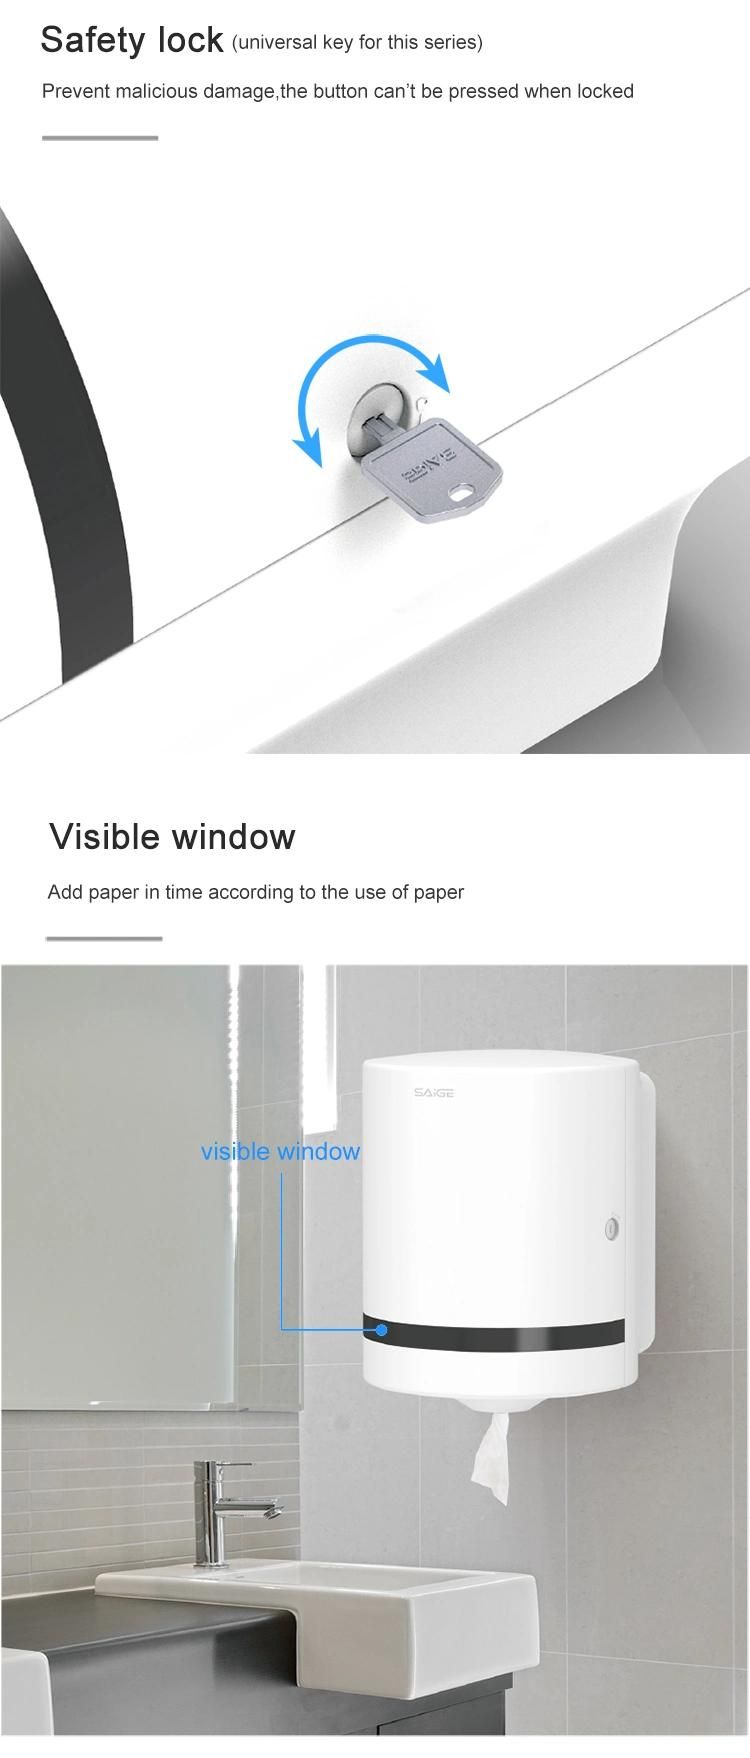 Saige High Quality ABS Plastic Wall Mounted Center Pull Jumbo Roll Toilet Tissue Dispenser